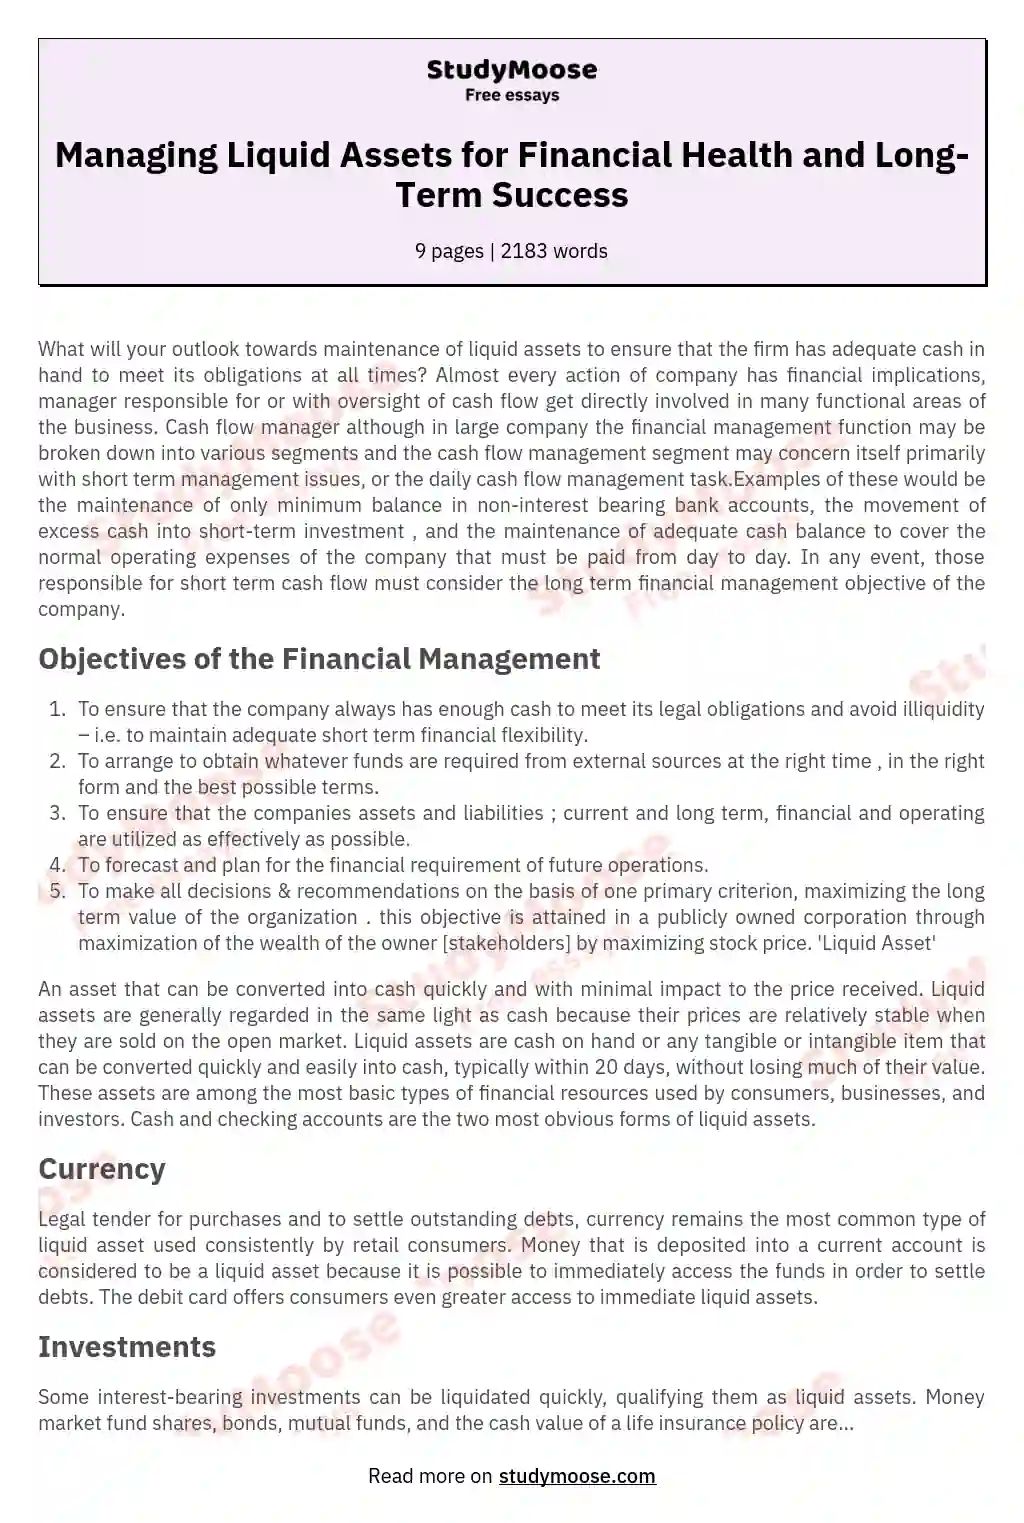 Managing Liquid Assets for Financial Health and Long-Term Success essay